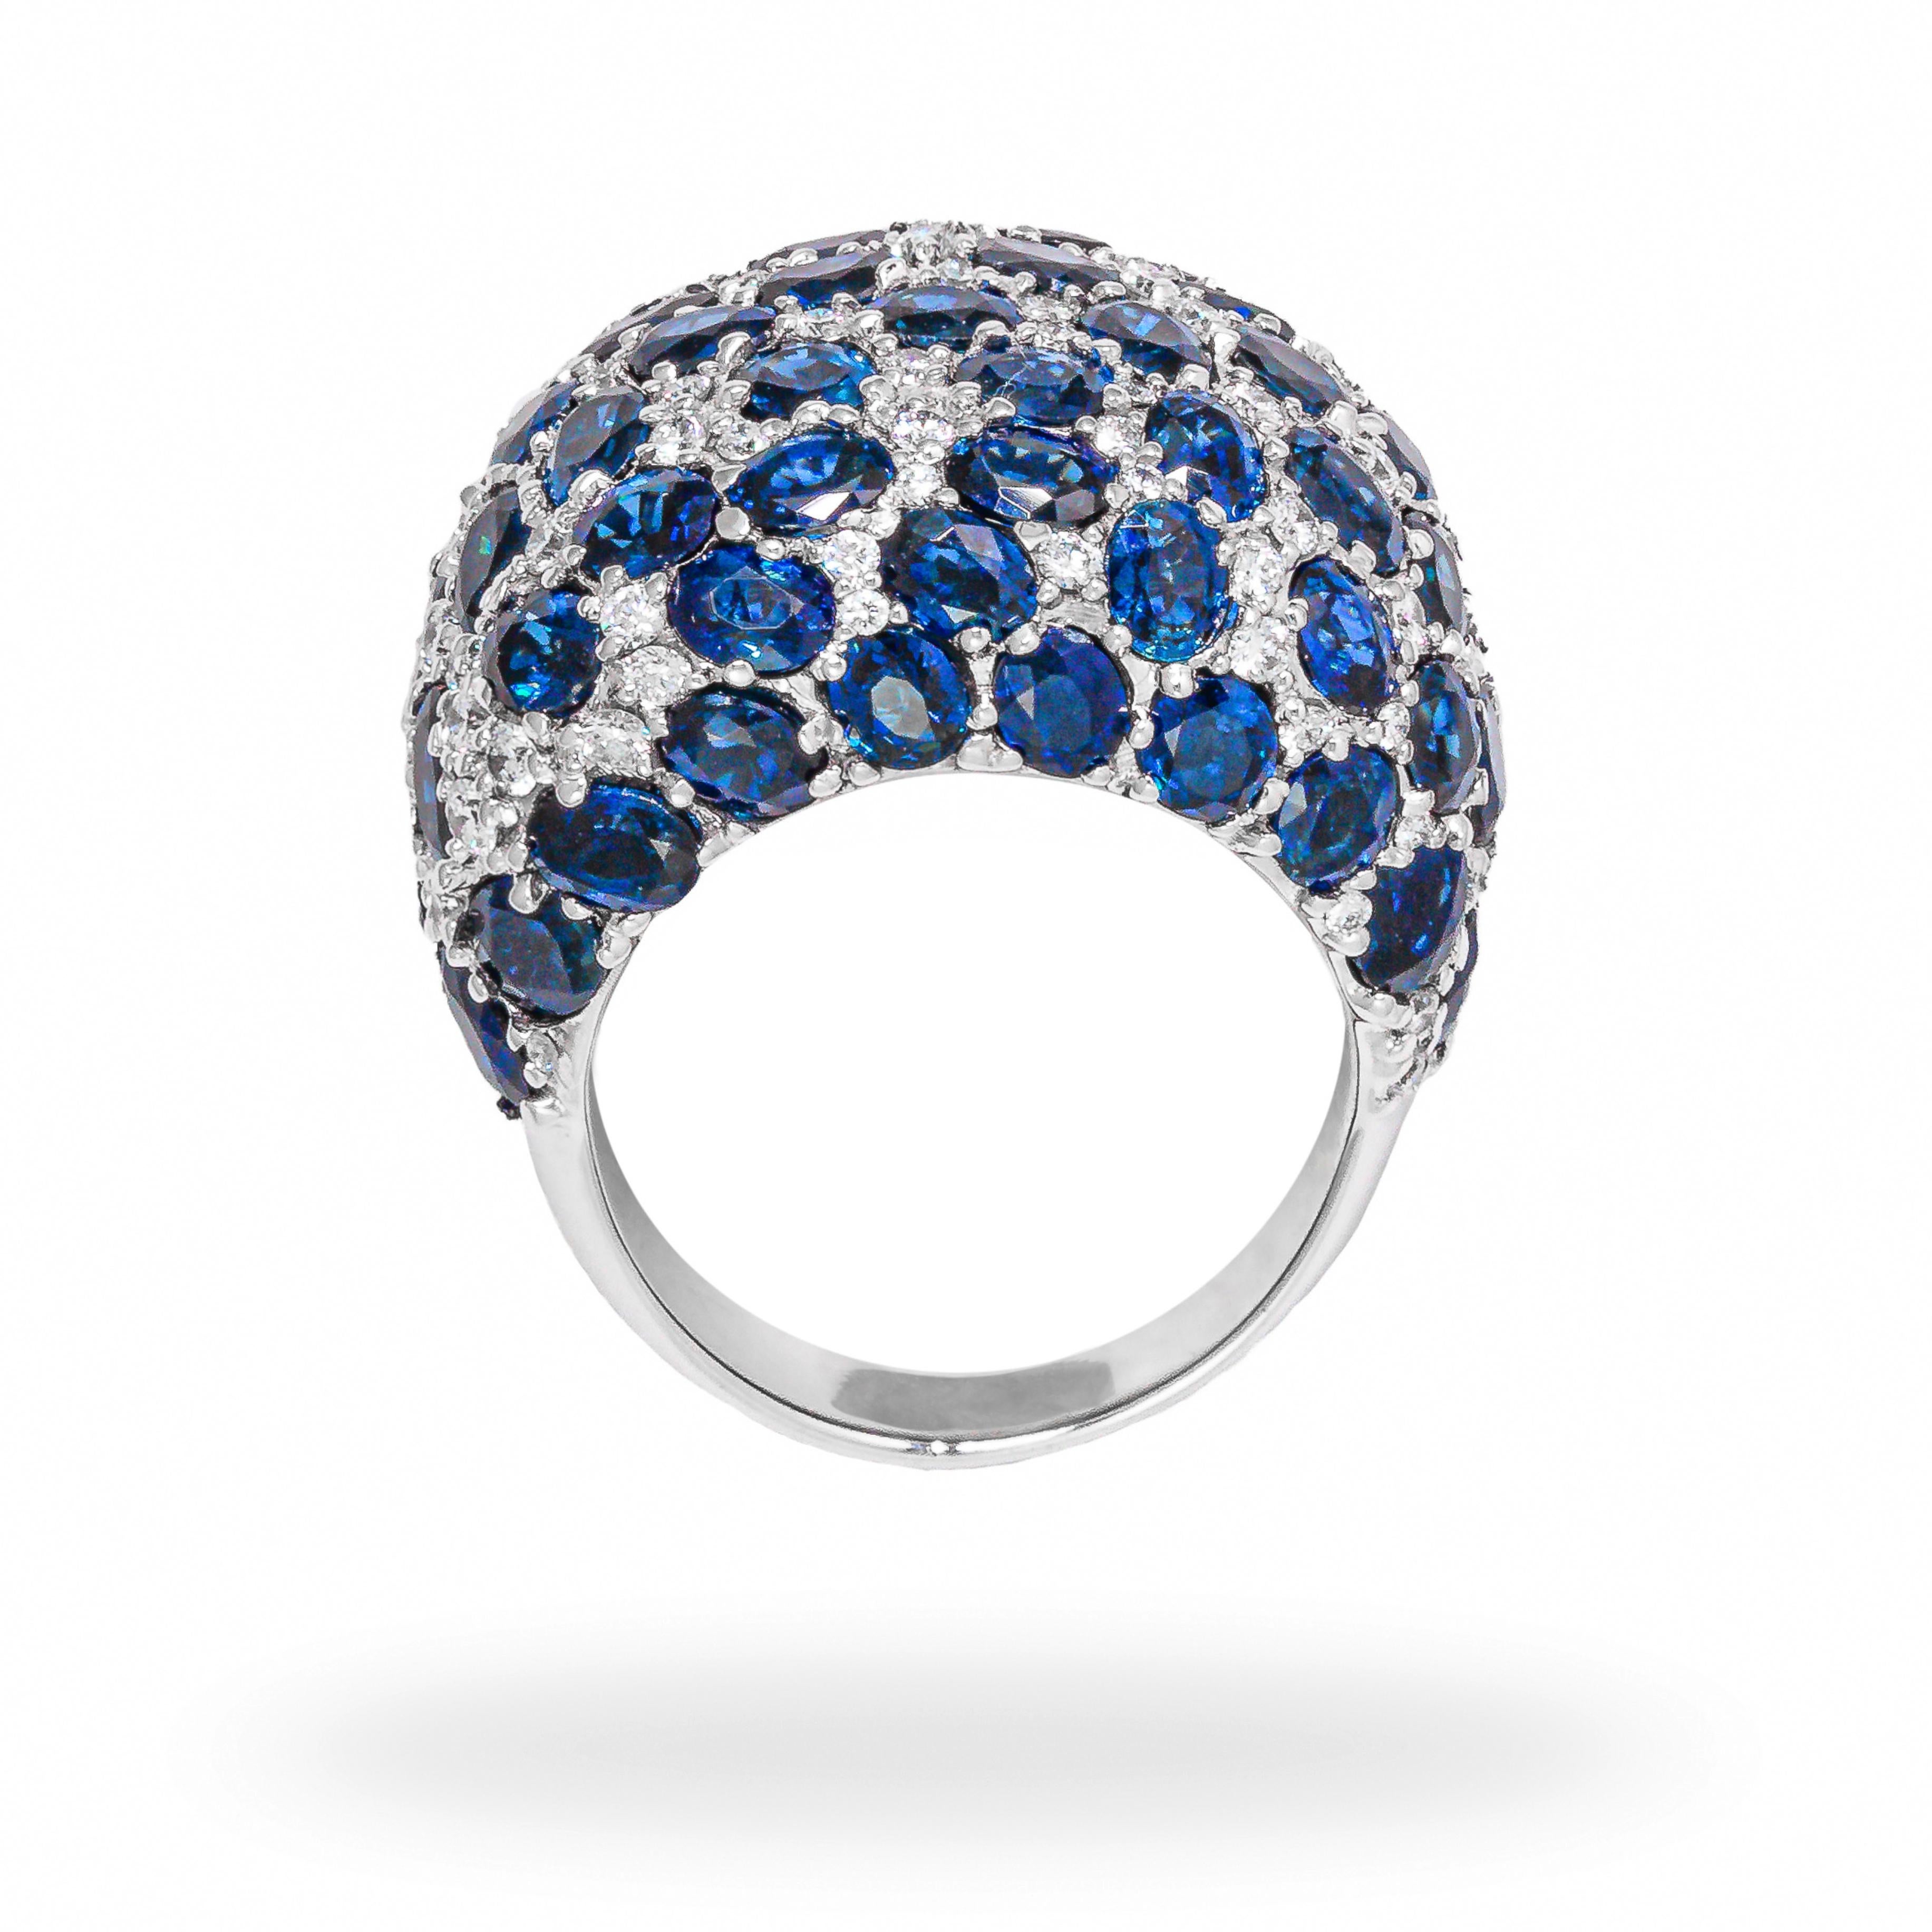 Blue Sapphire & Diamond Cocktail Ring Set in 18k White Gold by Shirin Uma In New Condition For Sale In London, GB